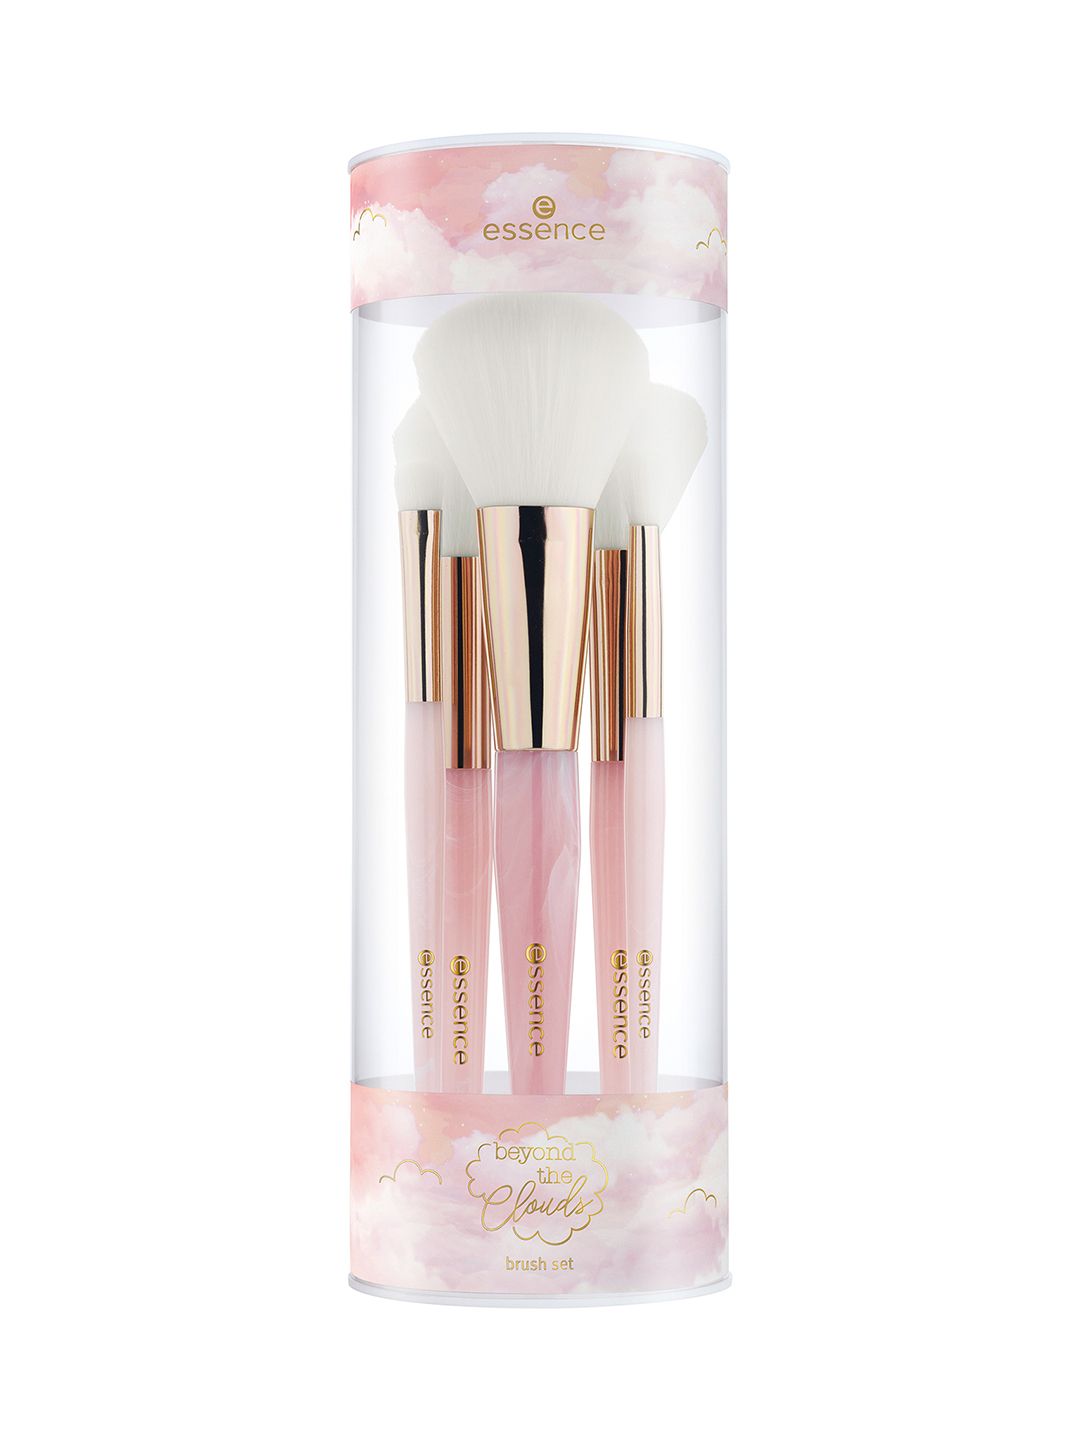 essence Beyond The Clouds Brush Set - 01 Price in India